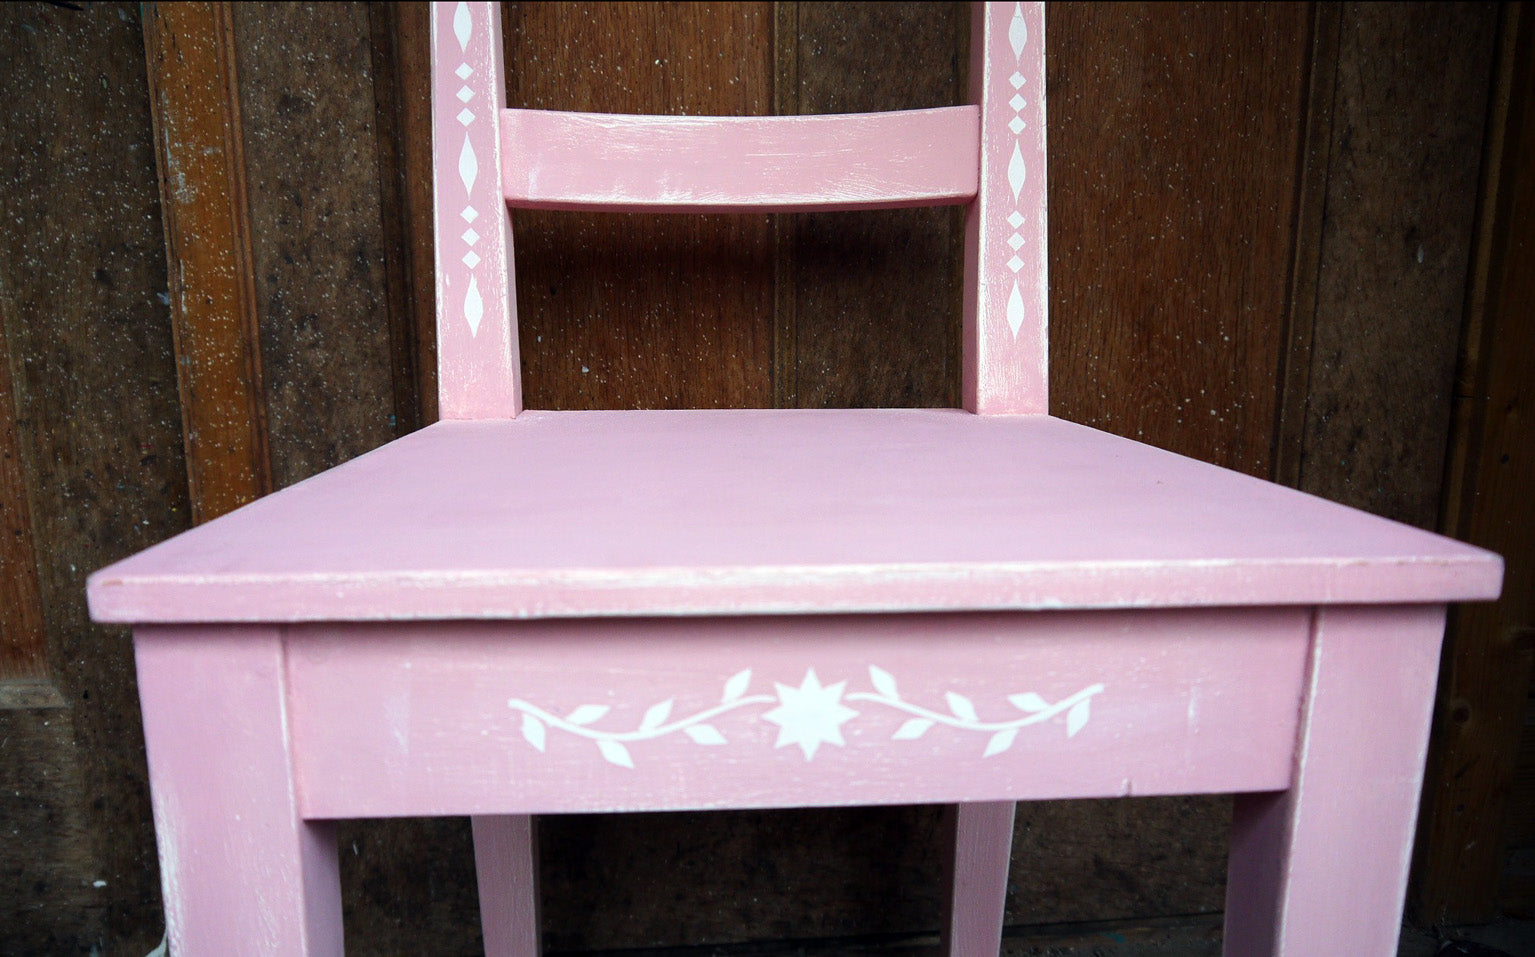 IKEA chair update painted in white and pik with bautiful folk art white stencil design - all profits got to Maggies Cancer Centres in aid of Breast Cancer Awarness Month